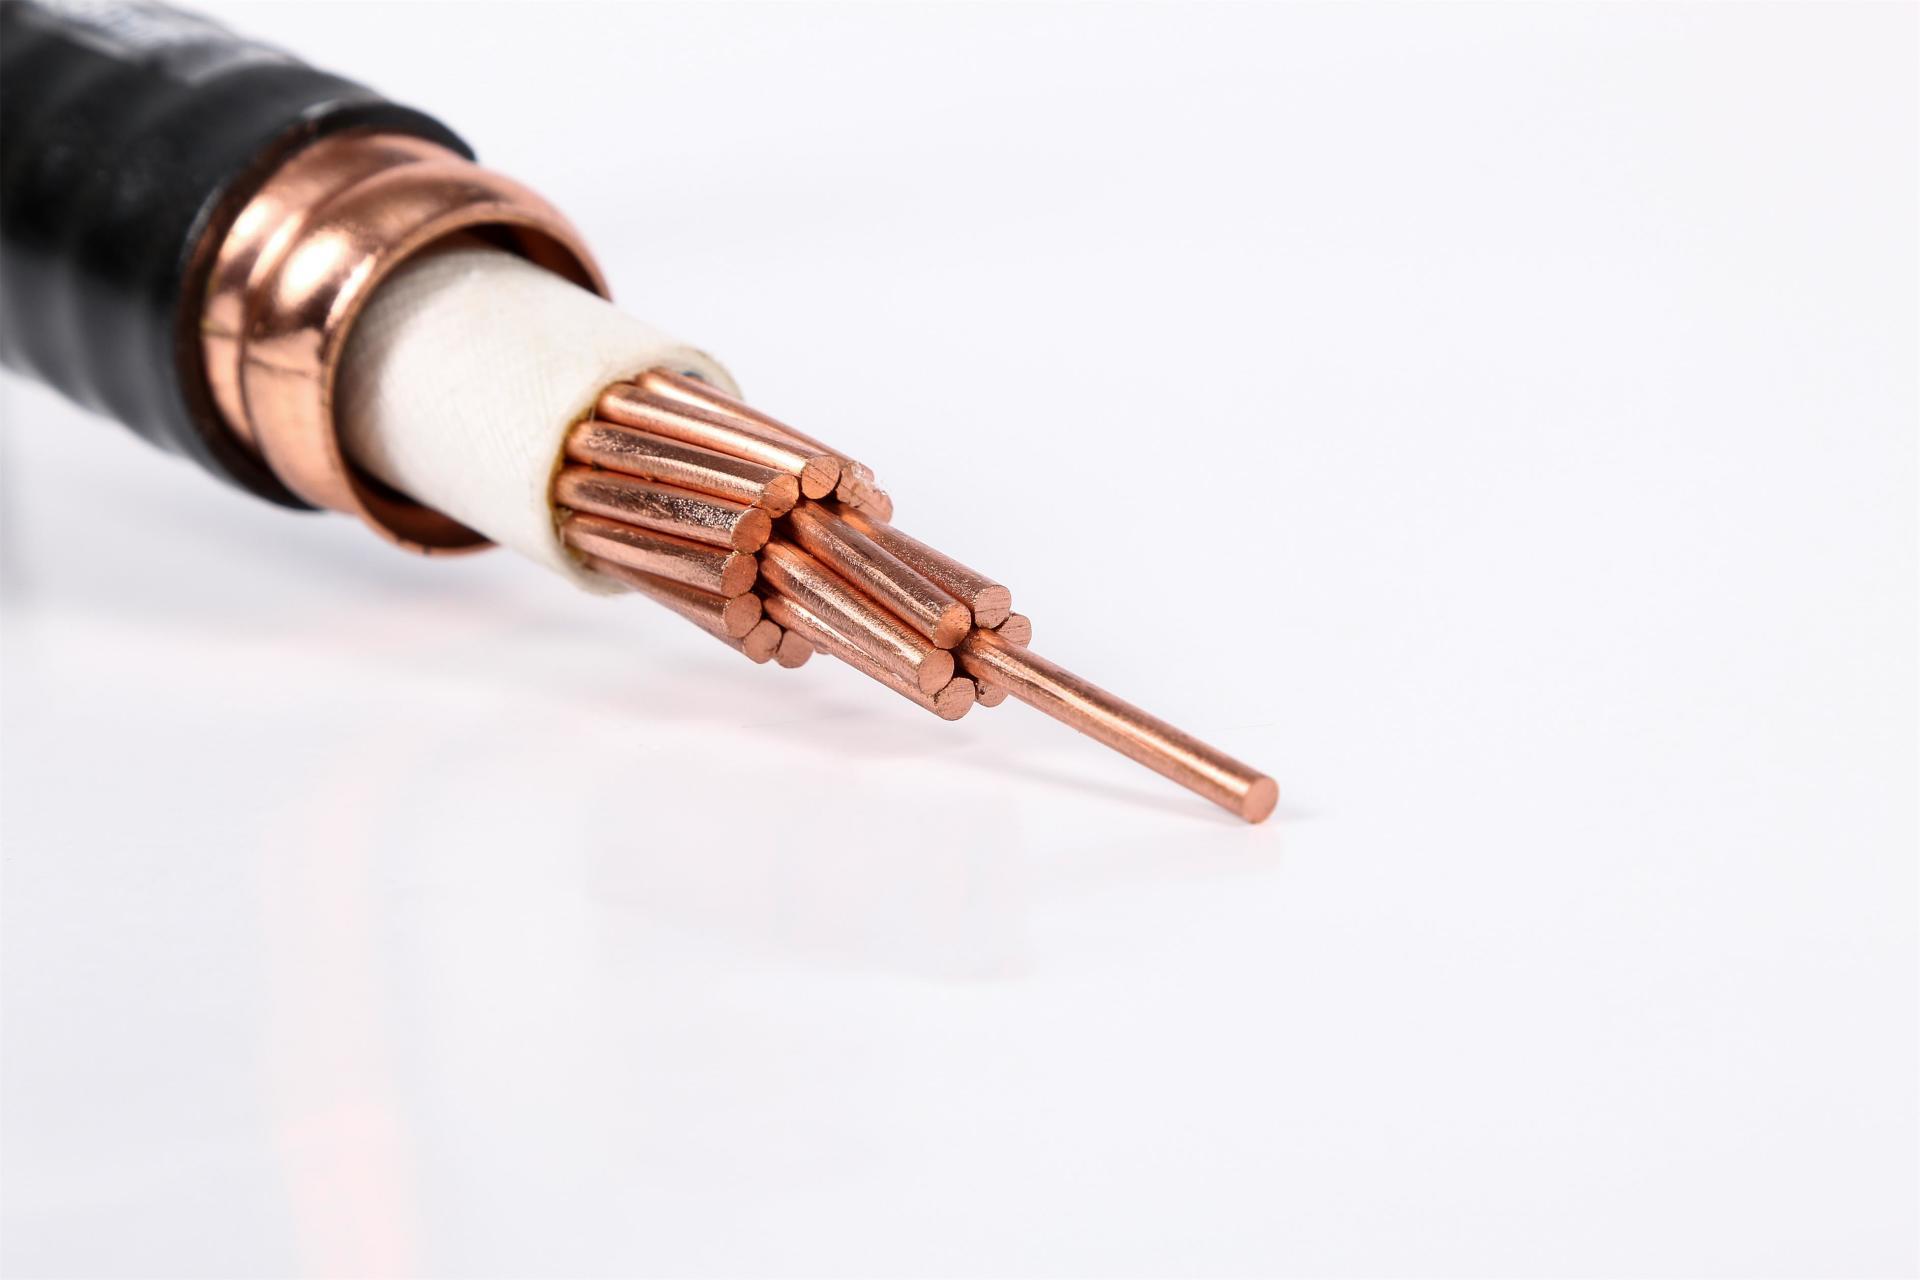 Flexible fireproof cable